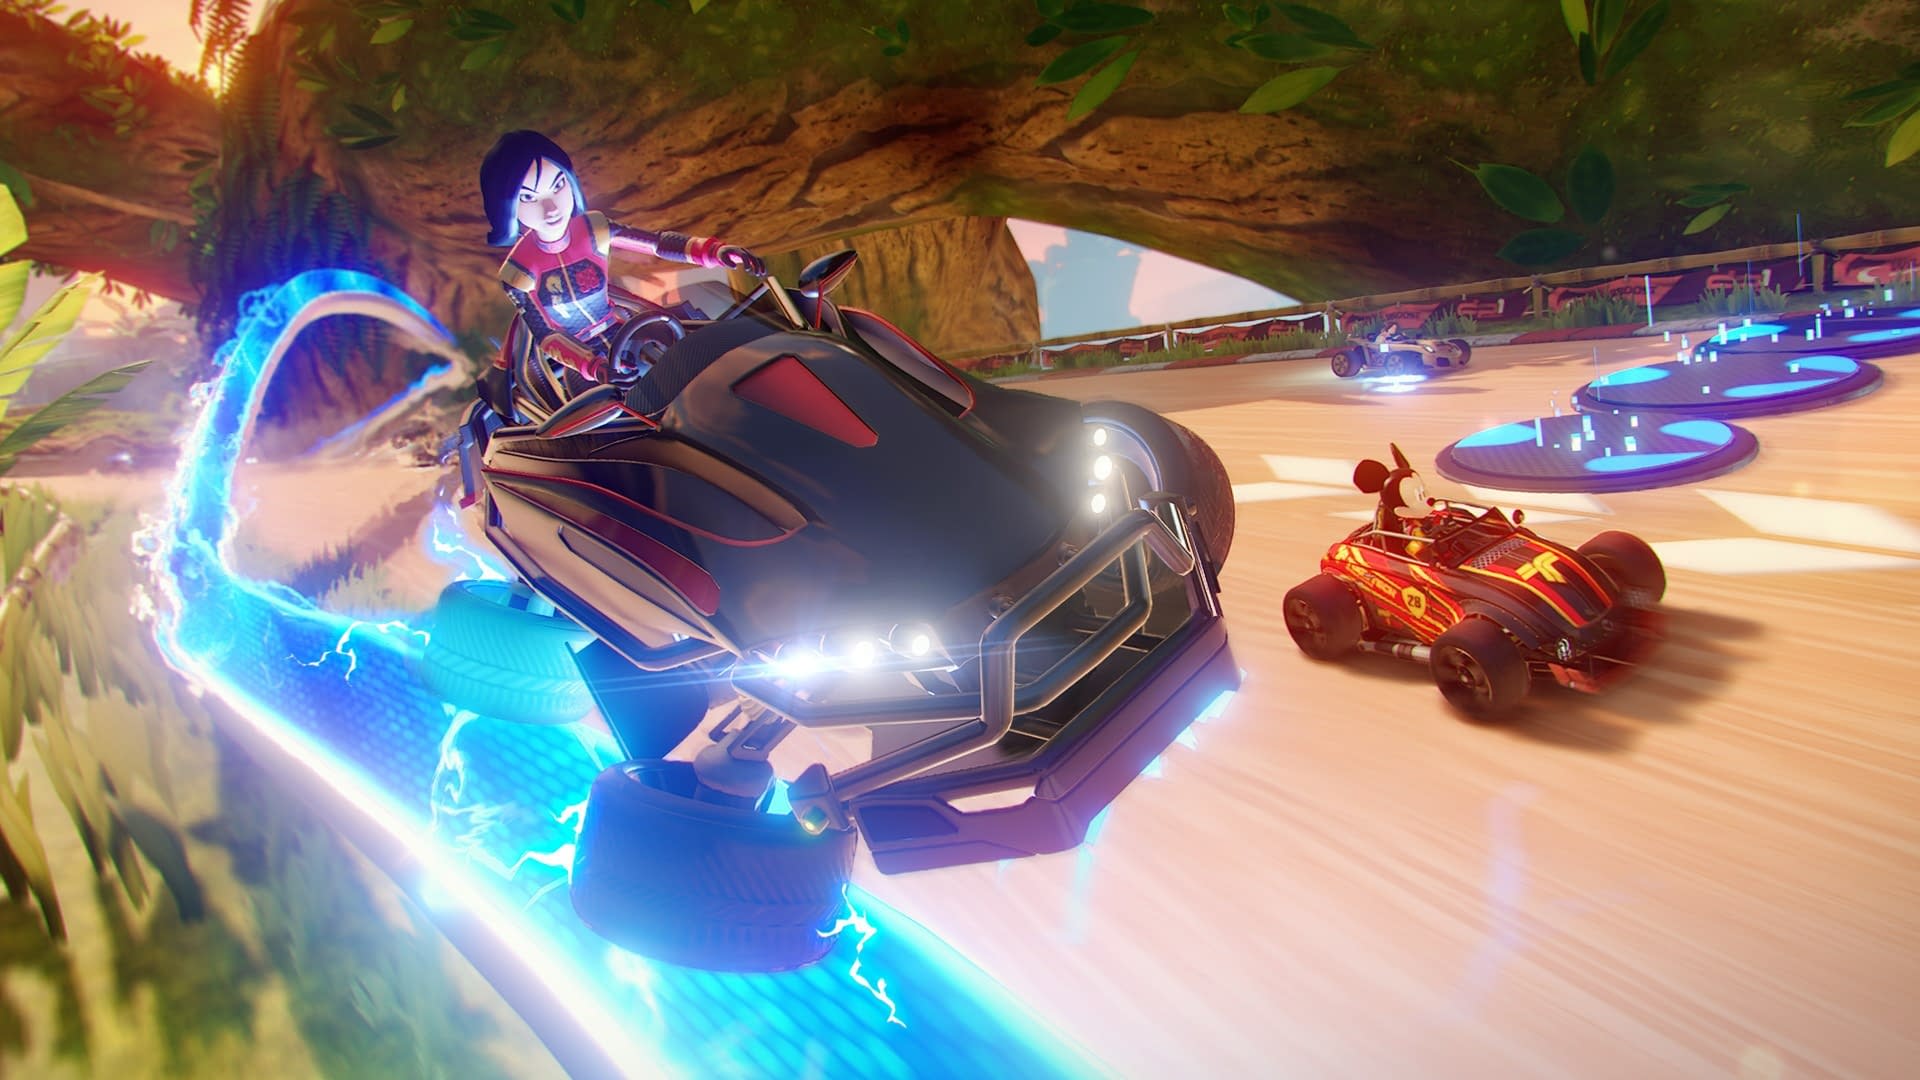 Disney Speedstorm comes as early access on April 18